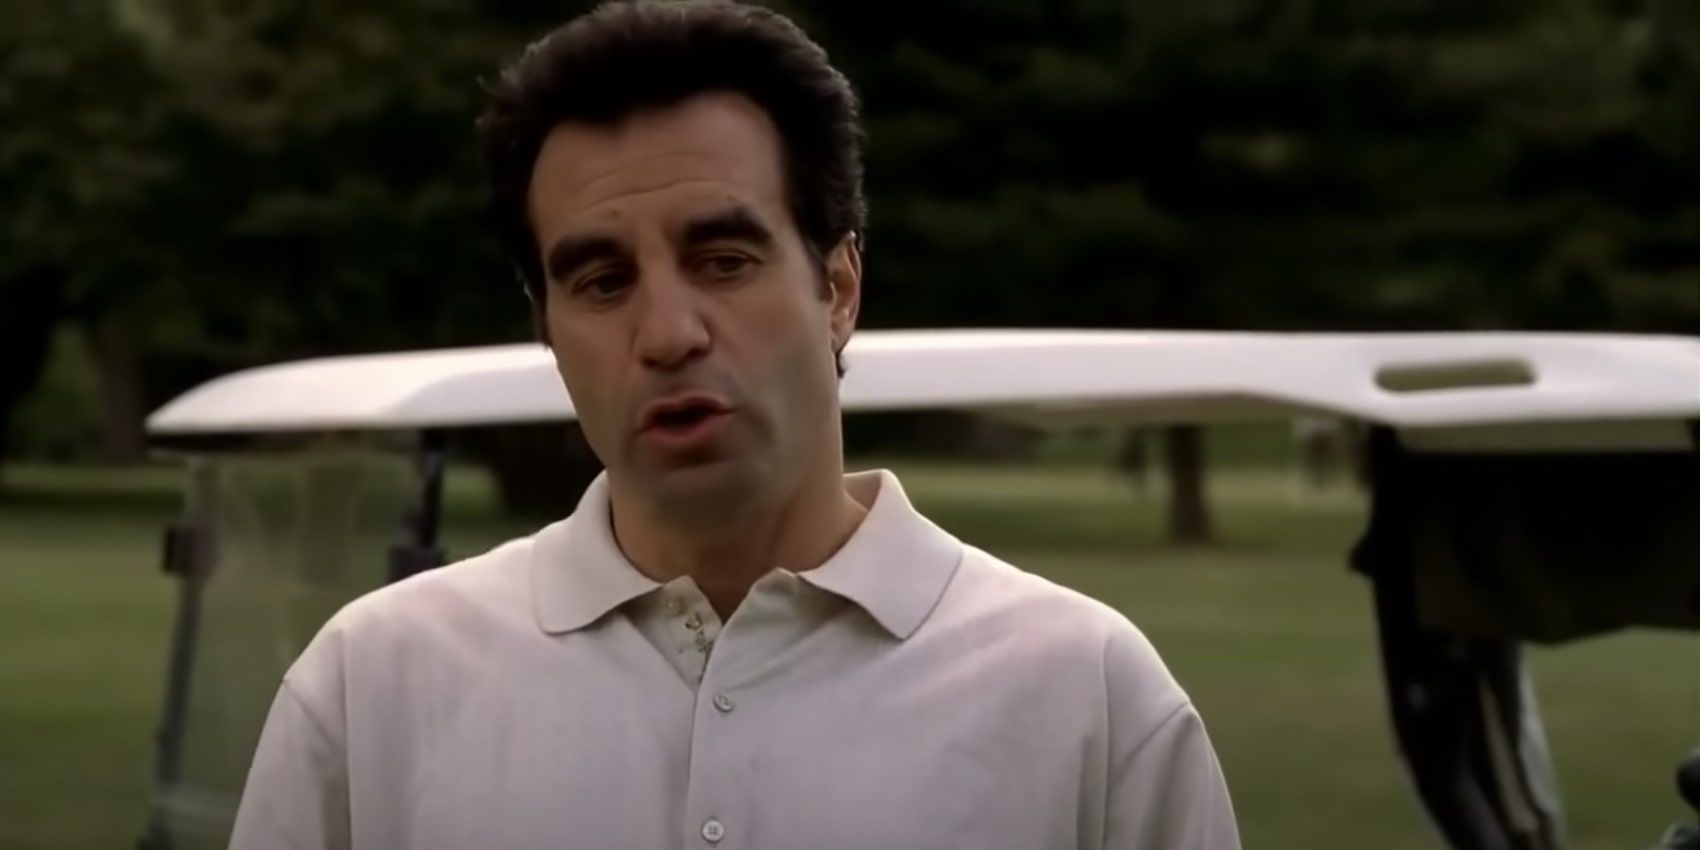 Little Carmine from The Sopranos